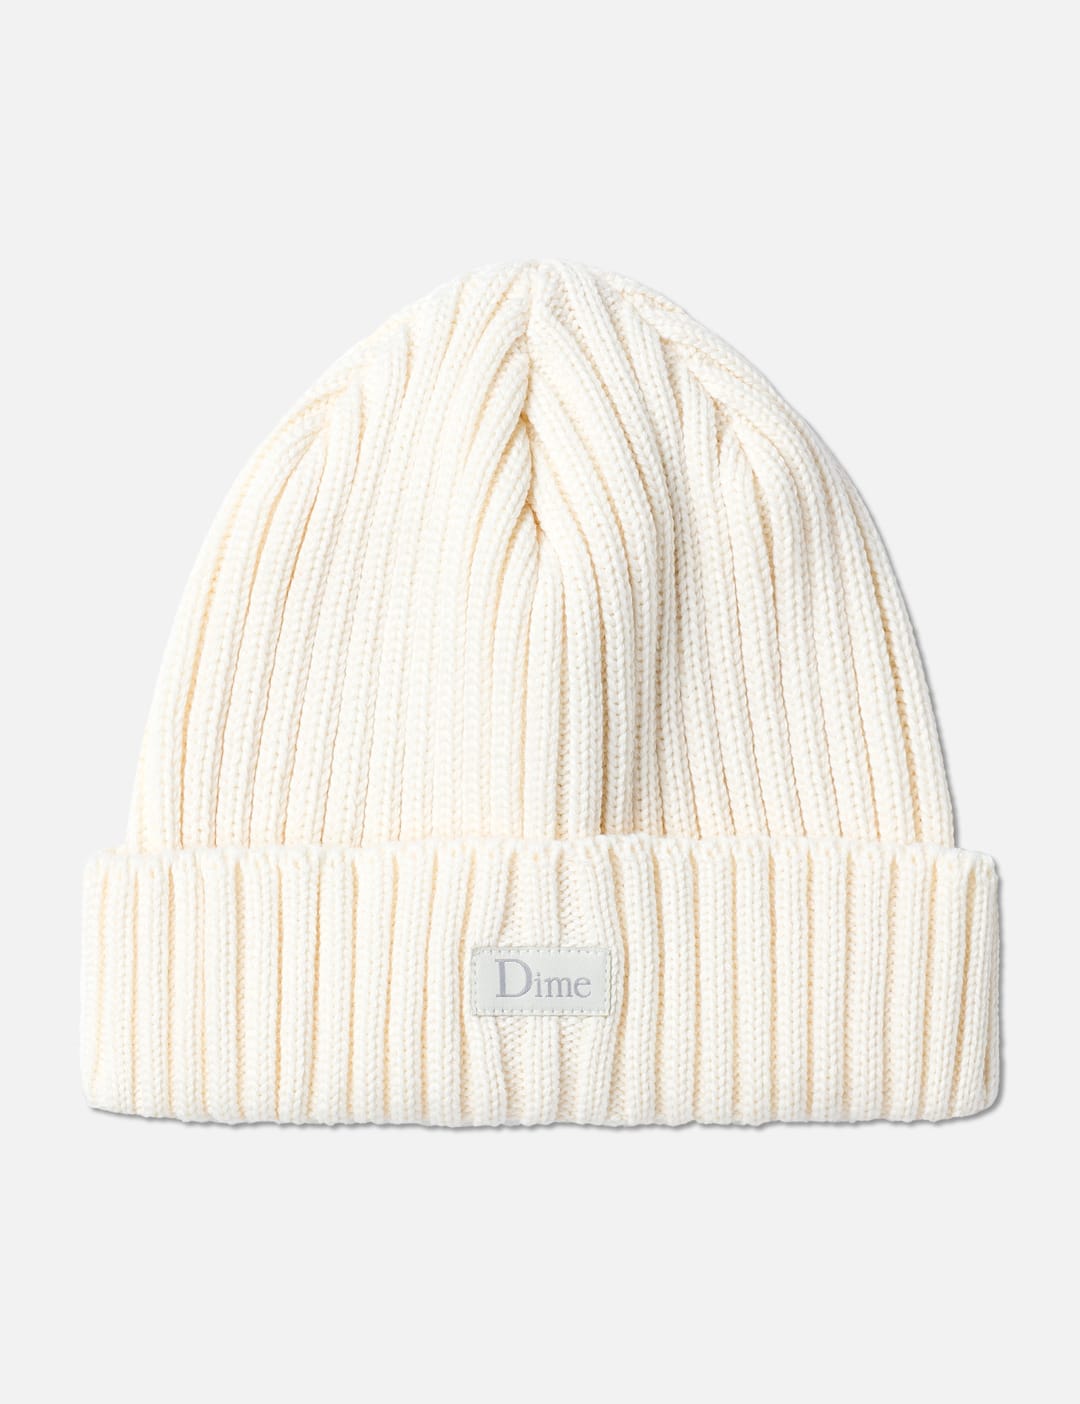 Butter Goods - Chain Link Beanie | HBX - Globally Curated Fashion 